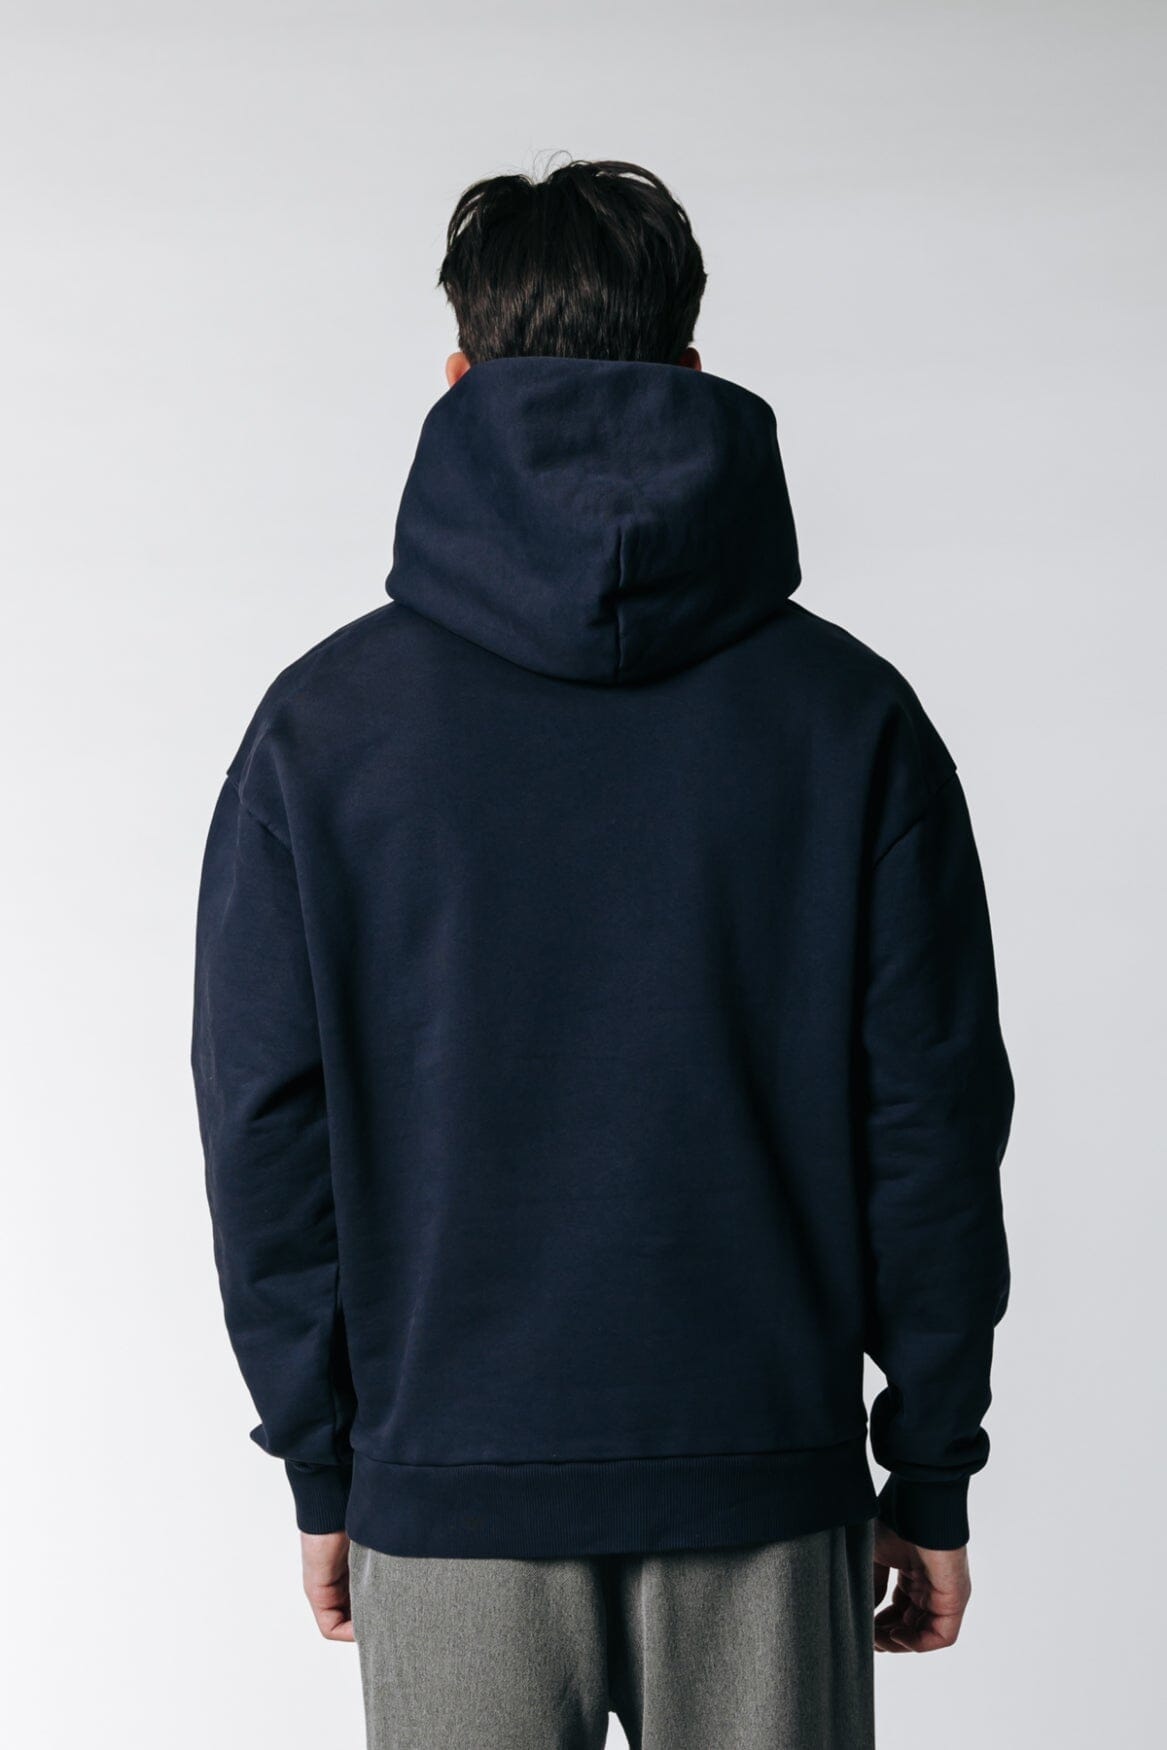 Colourful Rebel Uni Logo Relaxed Clean Hoodie | Navy